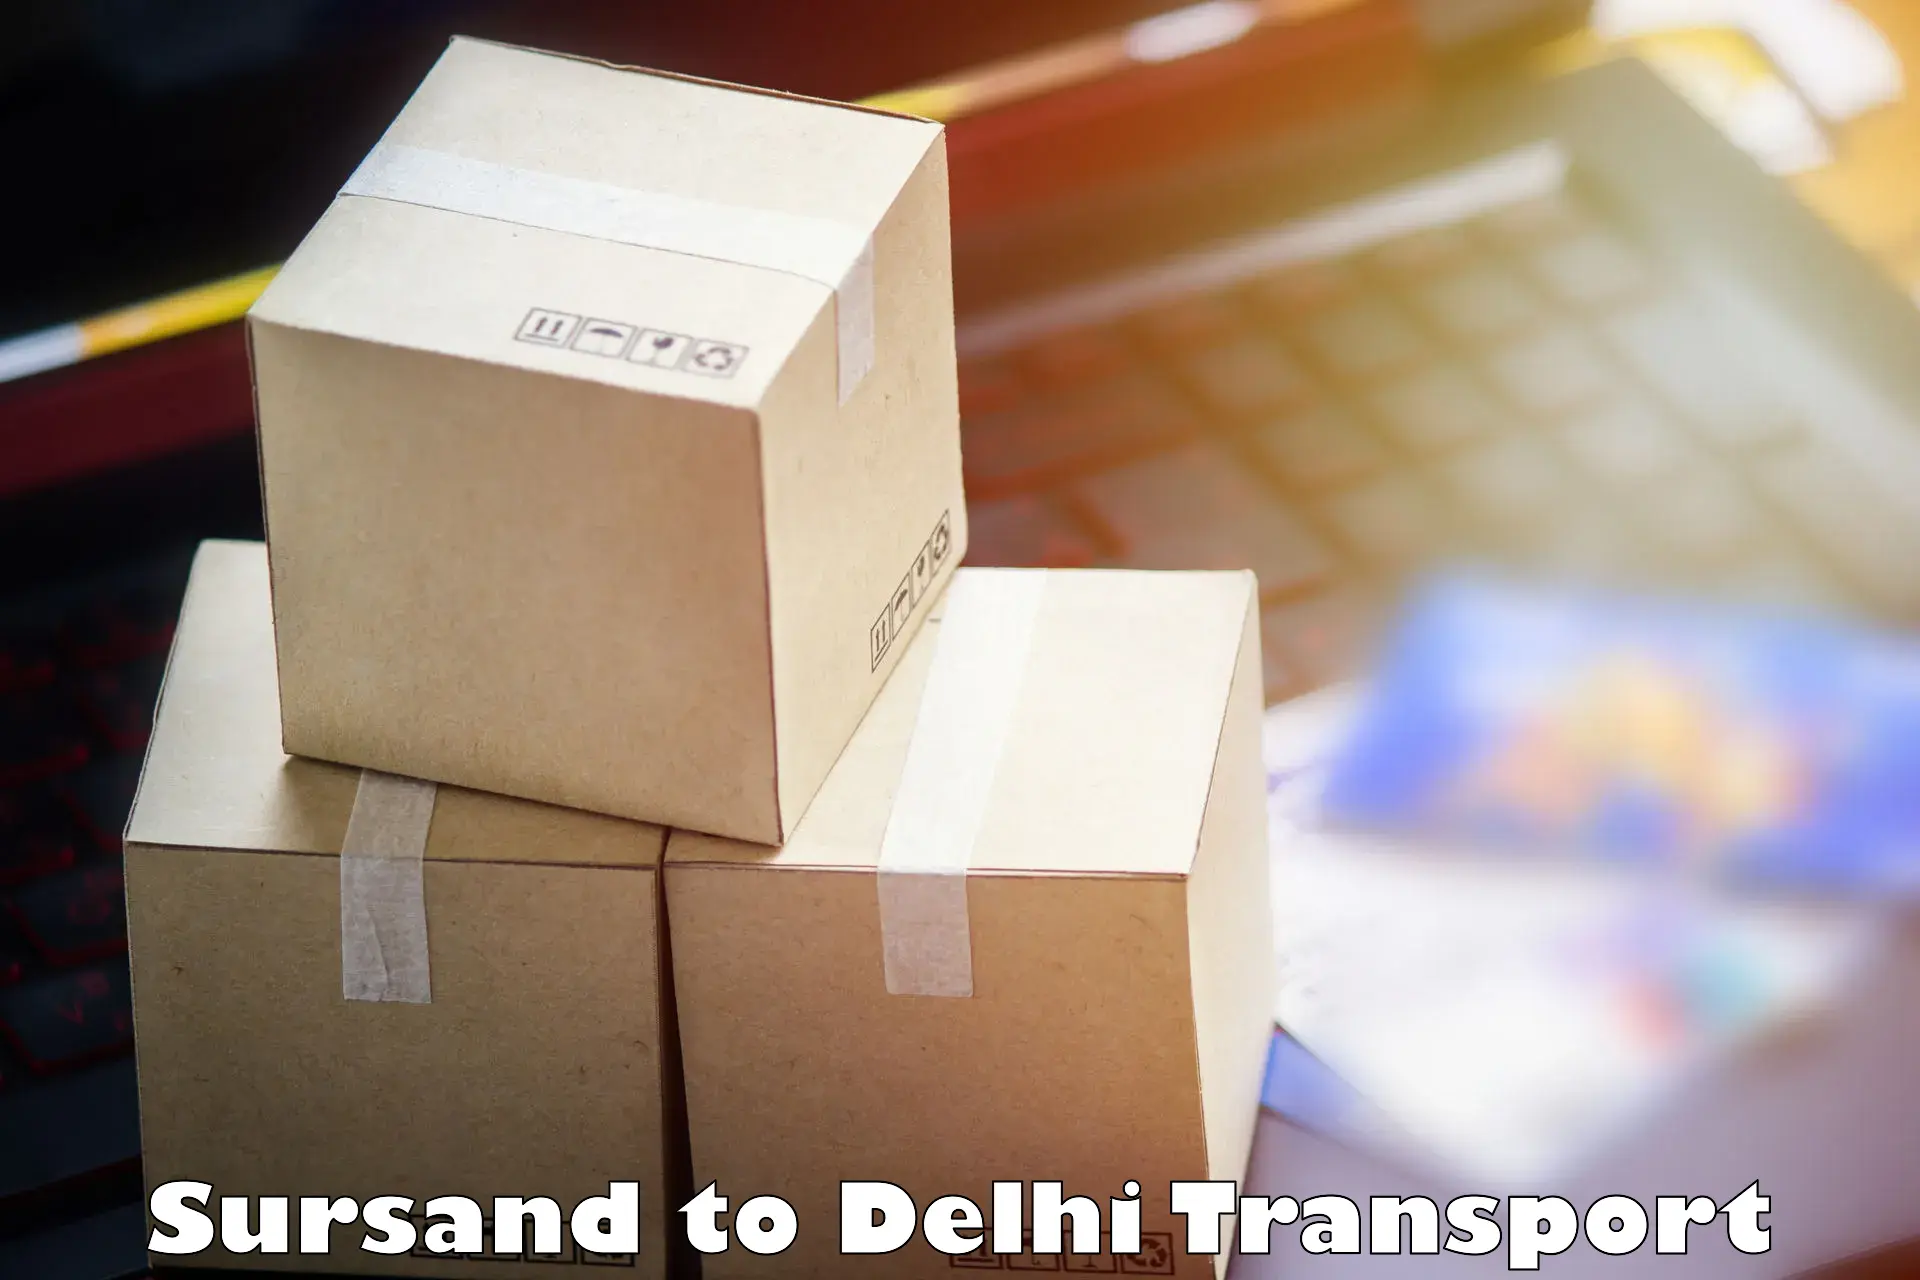 Express transport services Sursand to NCR